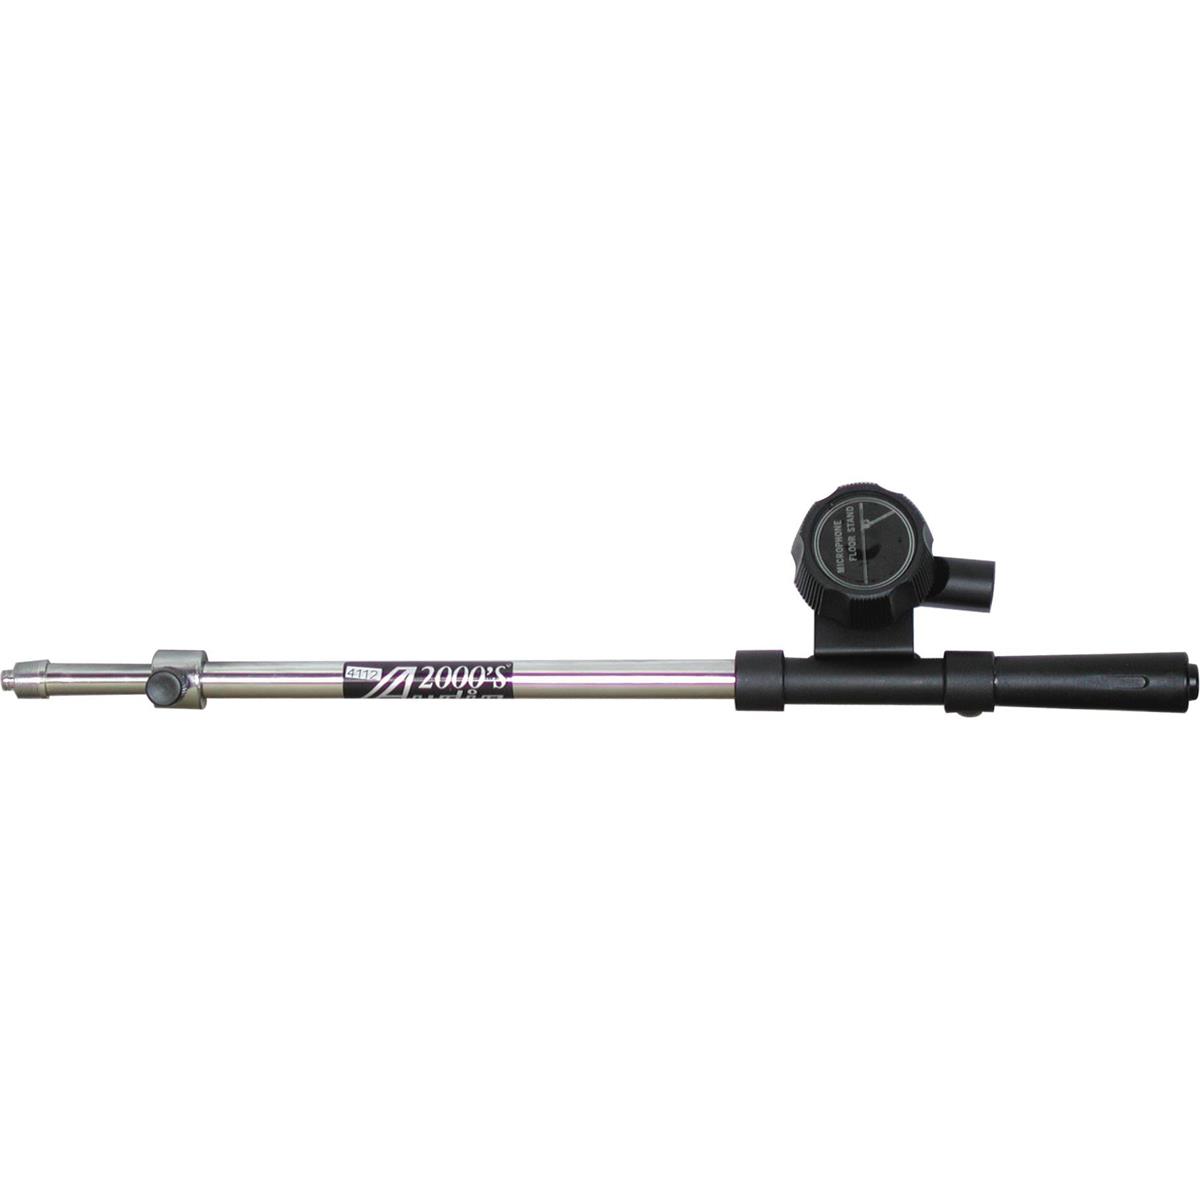 Image of Audio 2000s Telescopic Microphone Stand Boom Arm